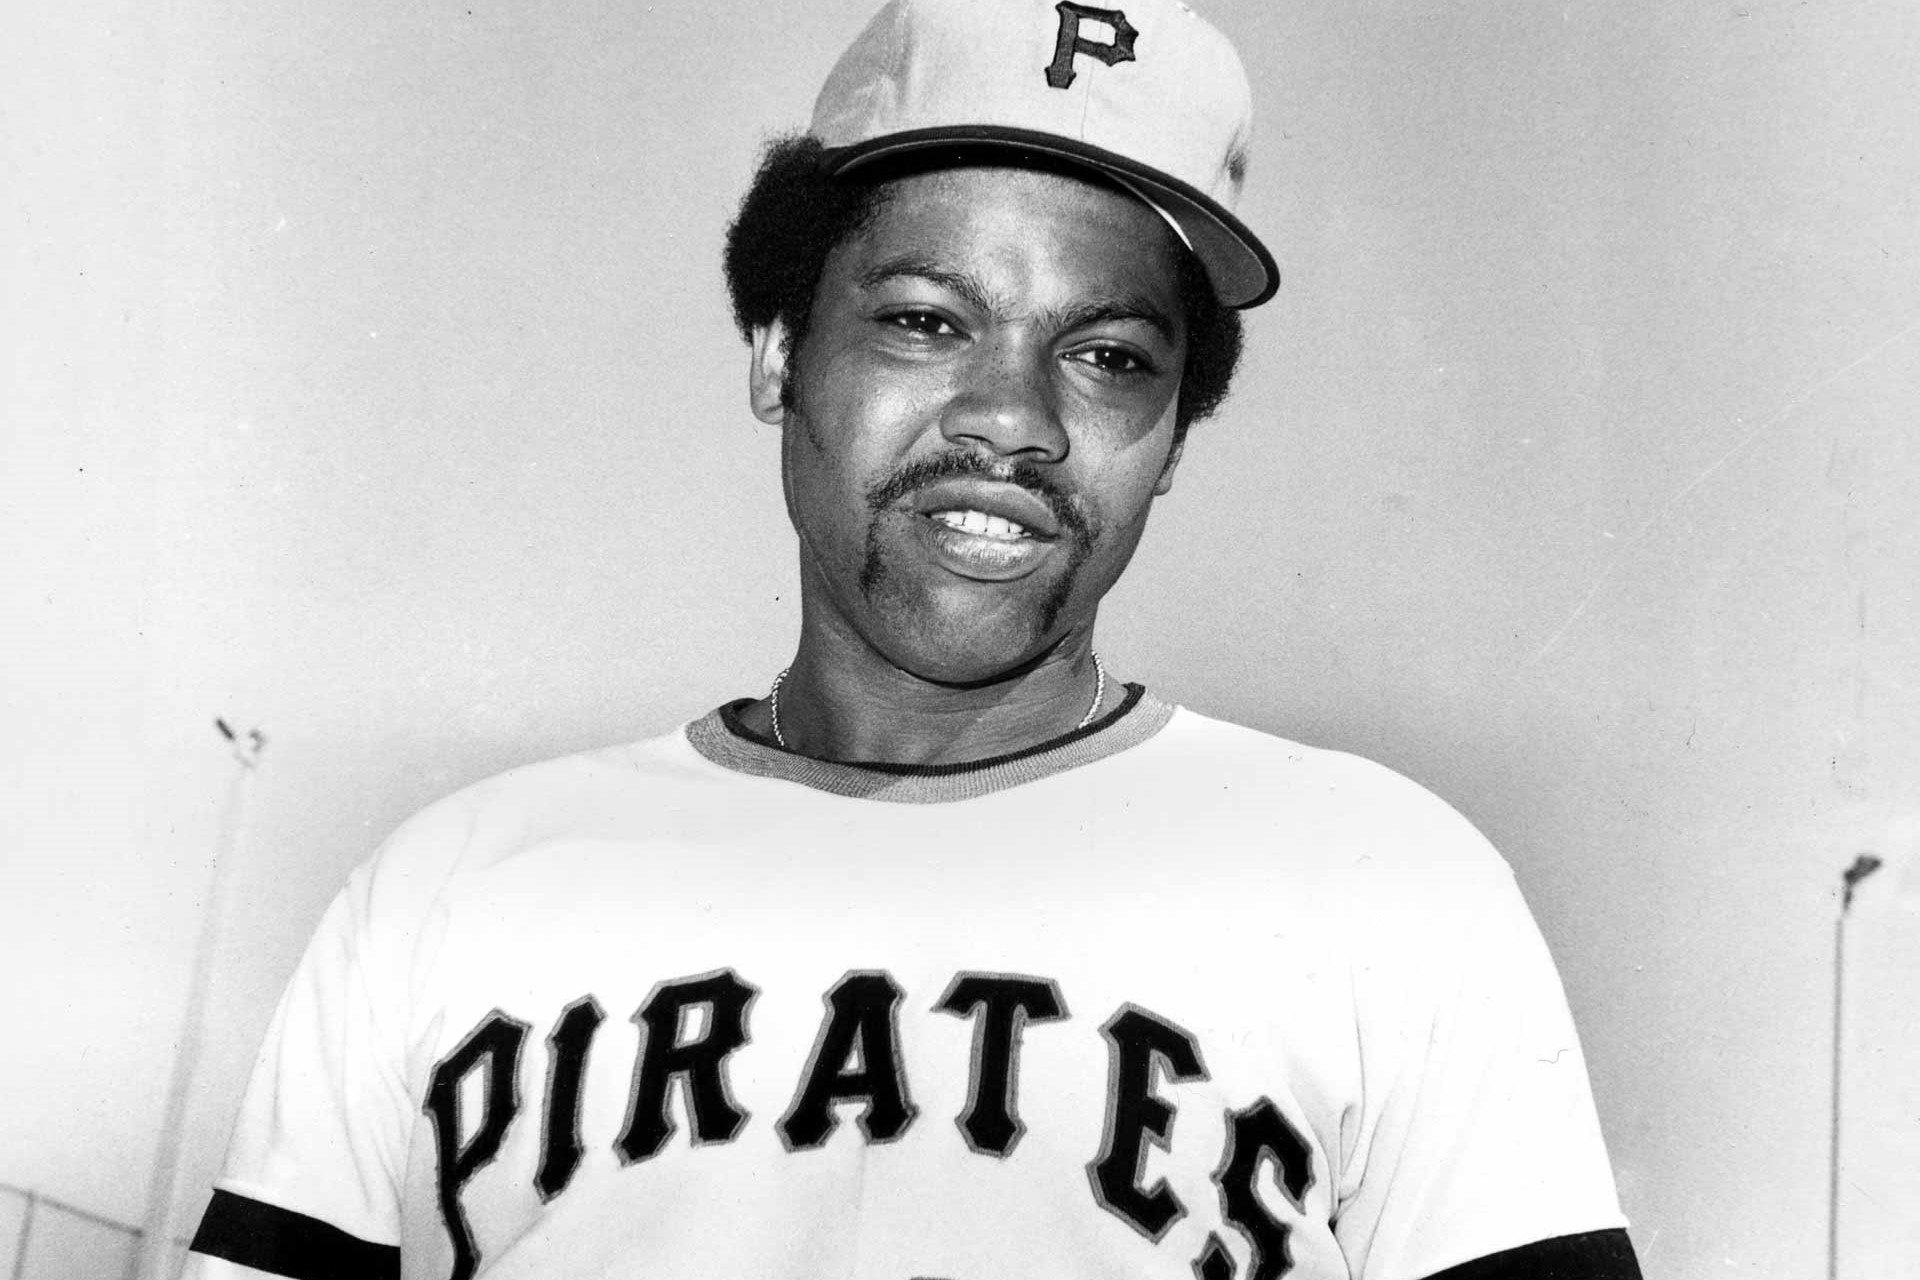 15 Enigmatic Facts About Dock Ellis - Facts.net